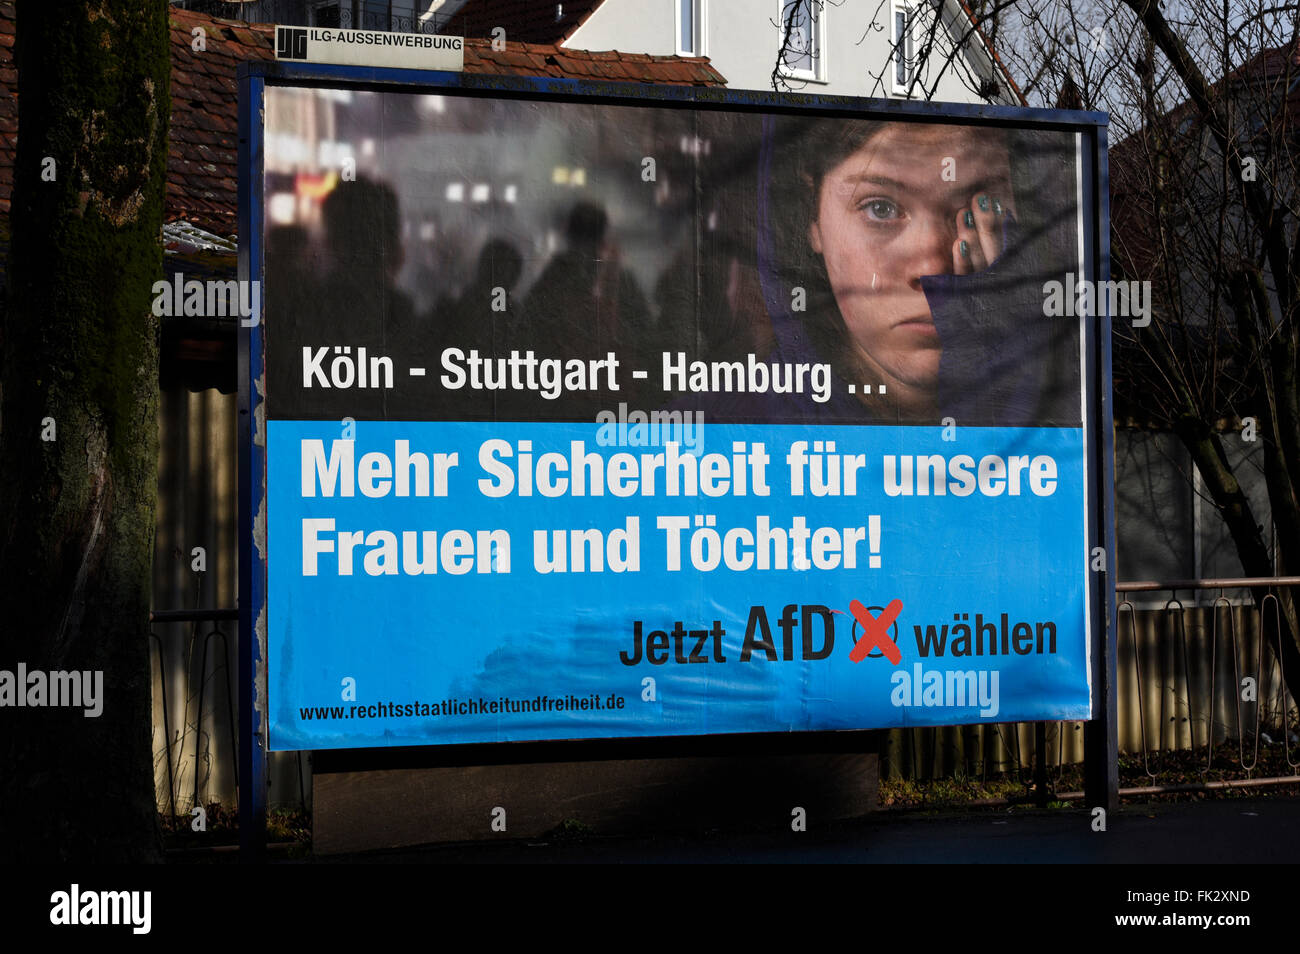 What pushed Germany to place the far-right AfD under 